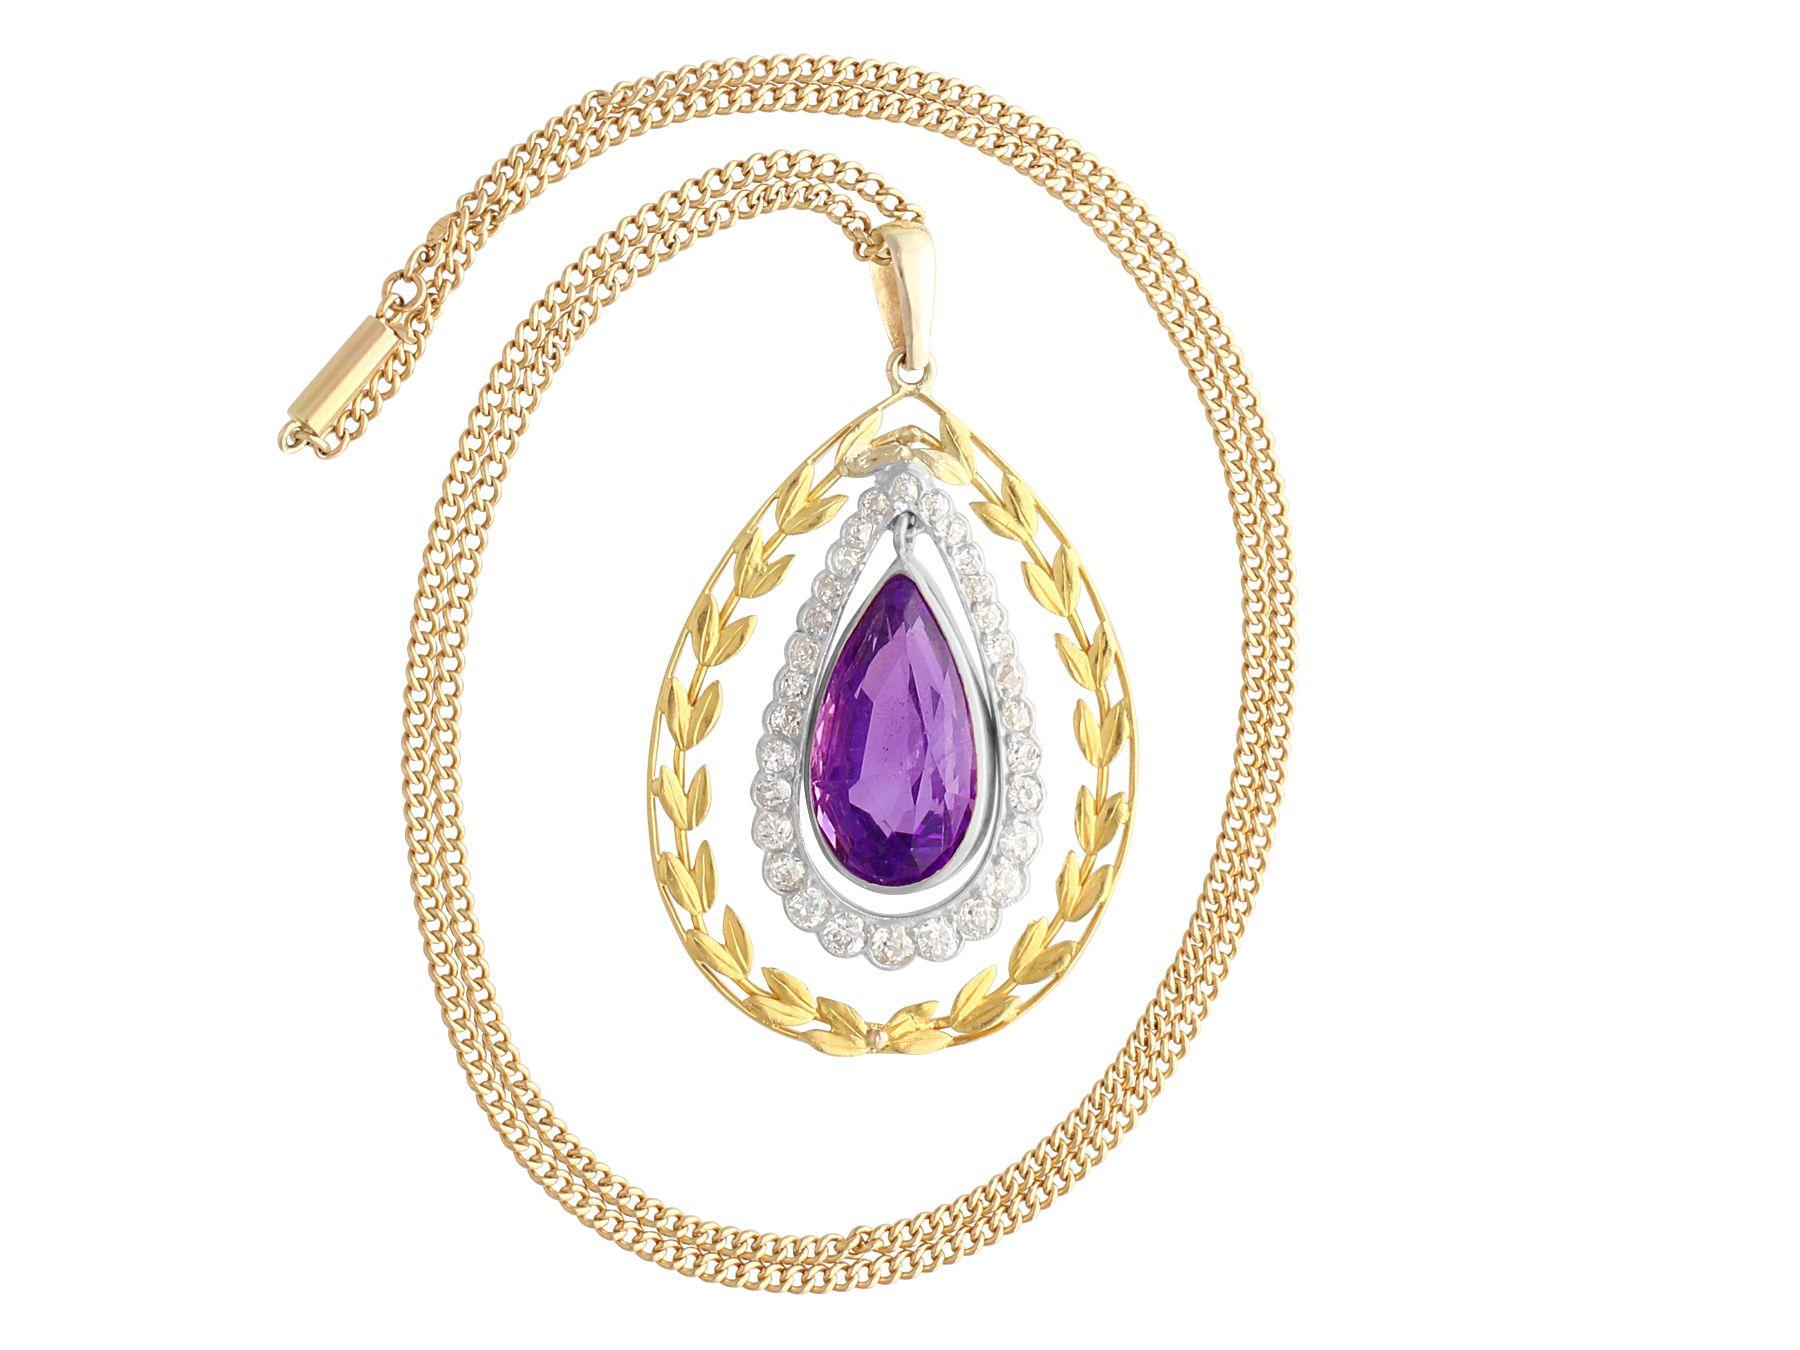 A stunning, fine and impressive antique 10.88 carat amethyst and 1.88 carat diamond 18 karat yellow gold and silver set pendant; part of our antique jewelry and estate jewelry collections.

This stunning, fine and impressive antique pendant has been